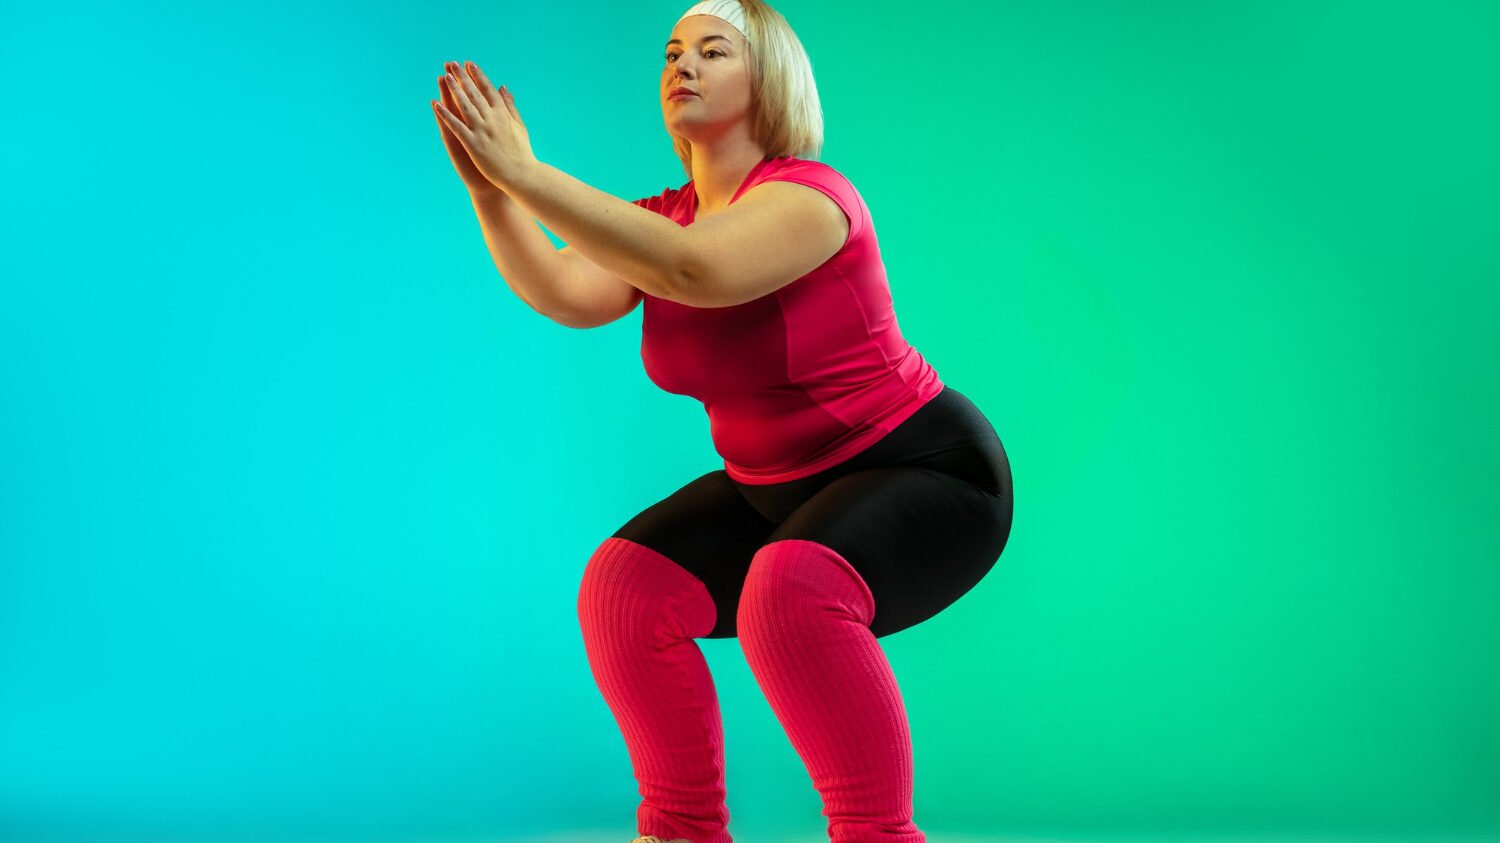 Young Caucasian Plus Size Female Model S Training Gradient Green Background Neon Light Doing Workout Exercises Stretching Cardio Concept Sport Healthy Lifestyle Body Positive Equality